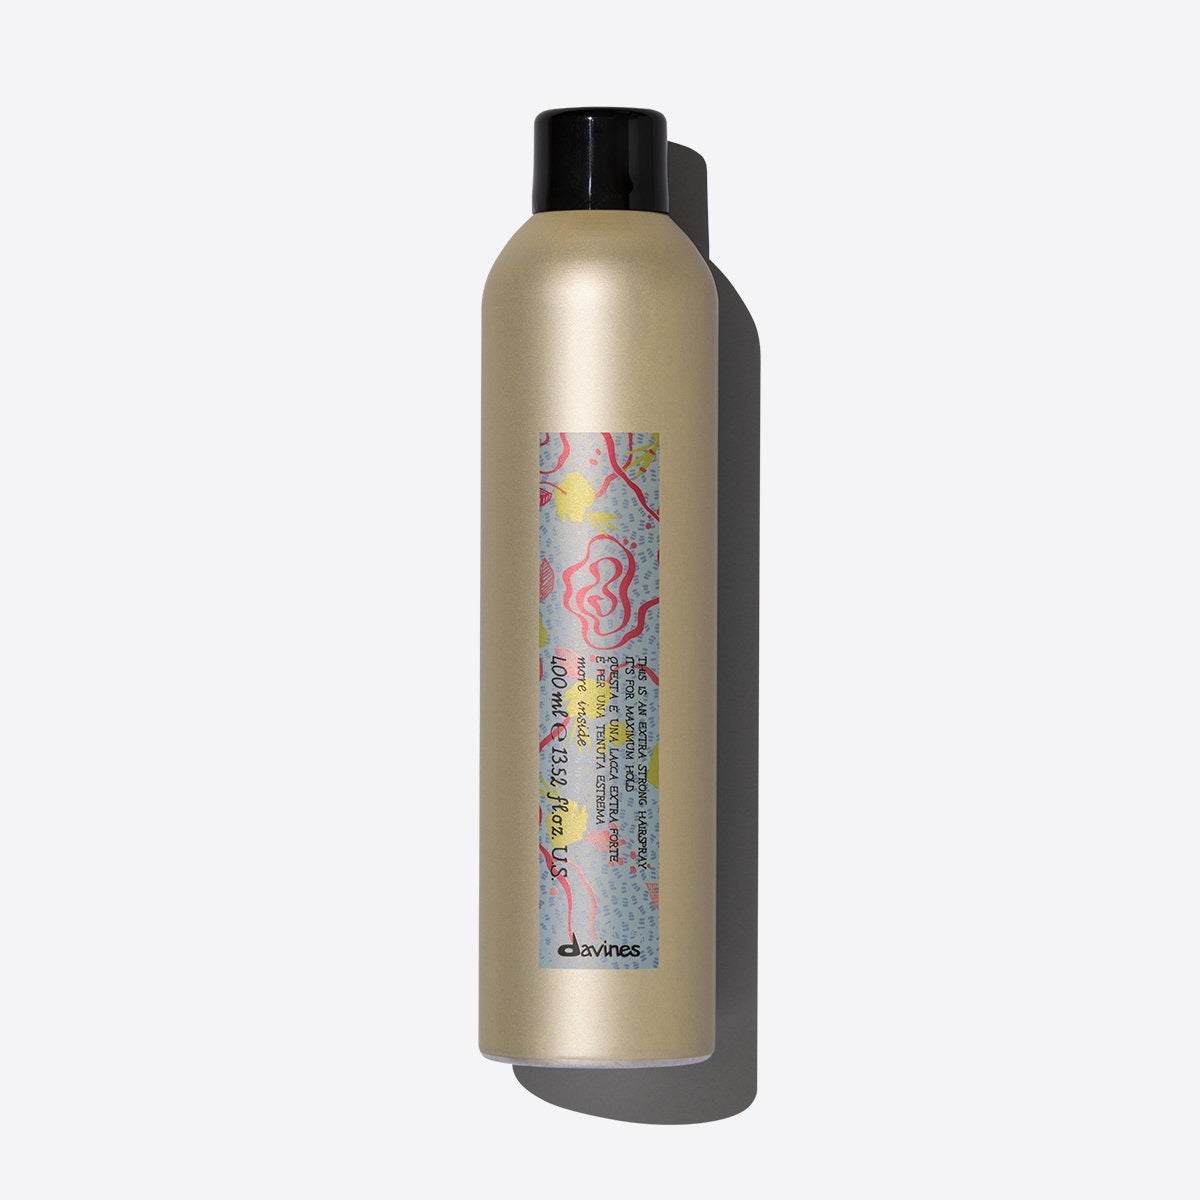 This is a Extra Strong Hairspray ~ Davines